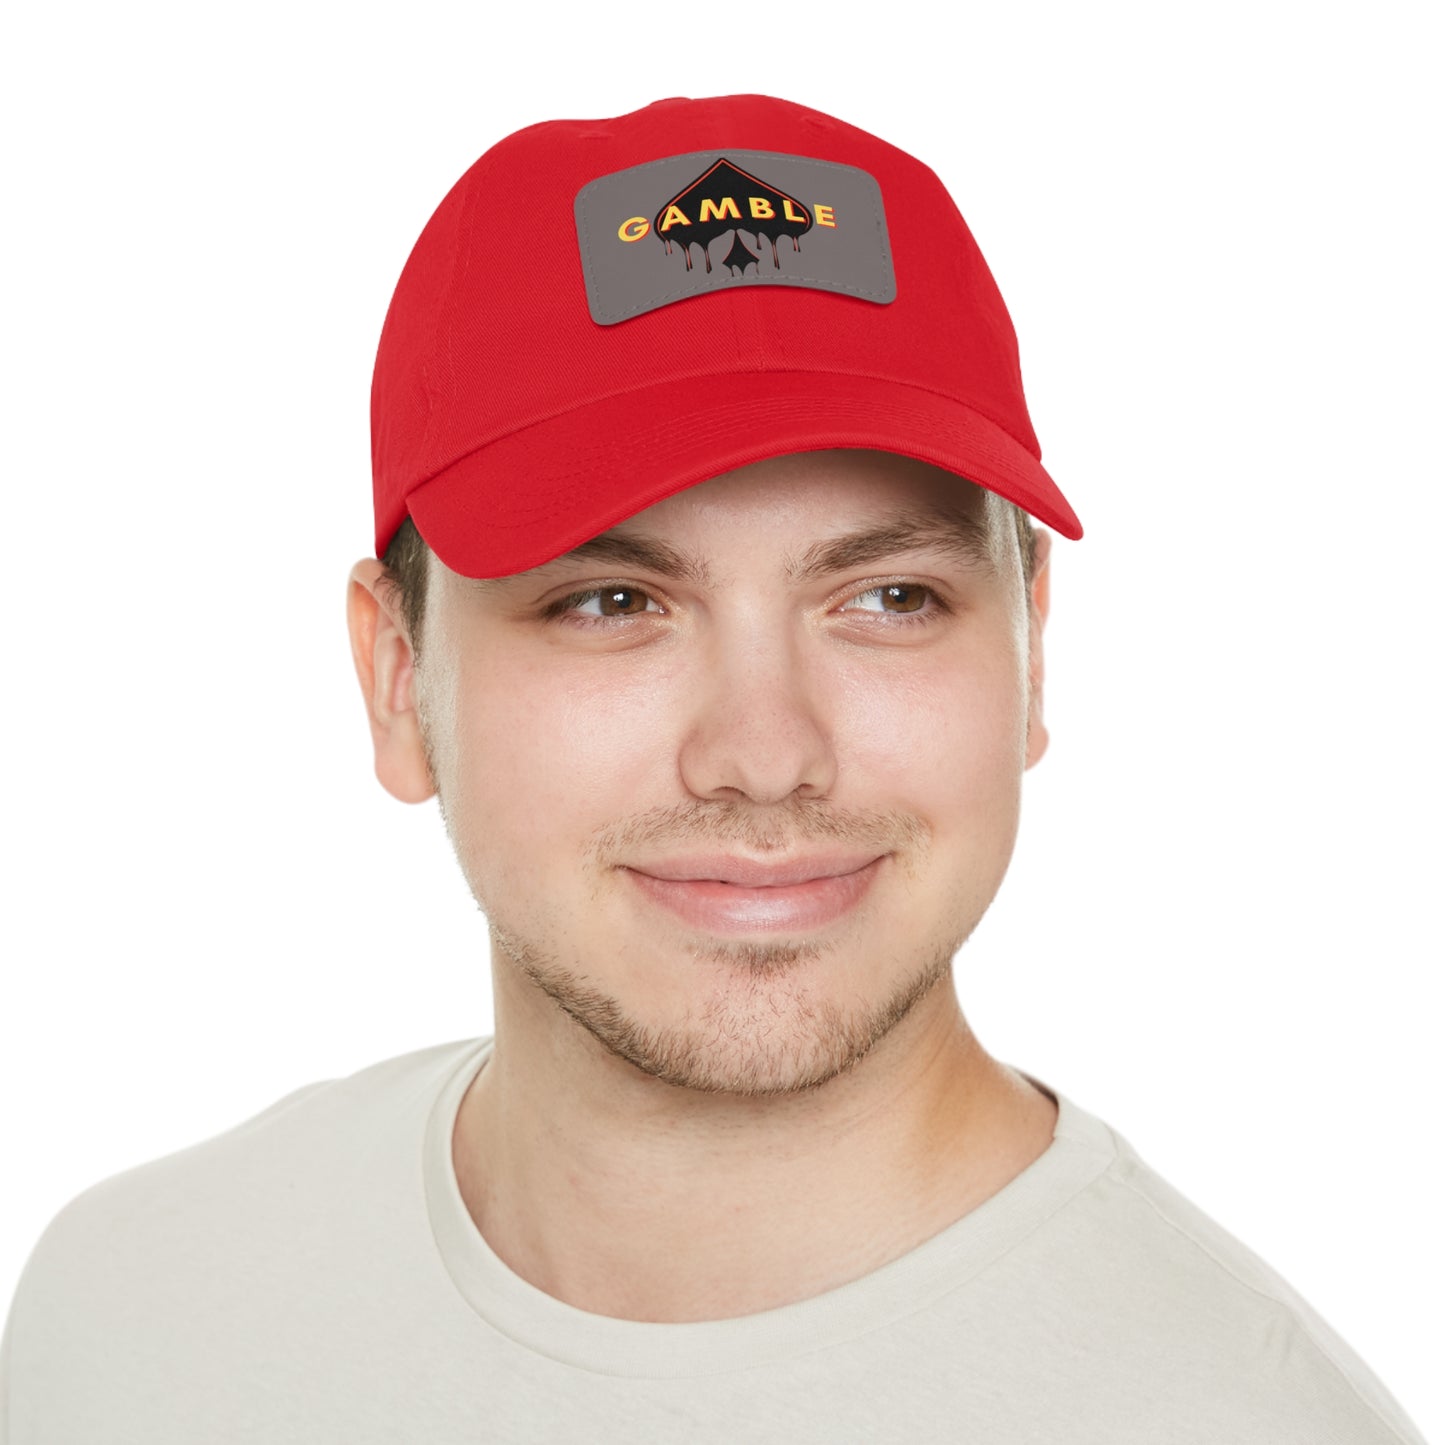 Elite Poker Pro Dad Cap with Leather Patch